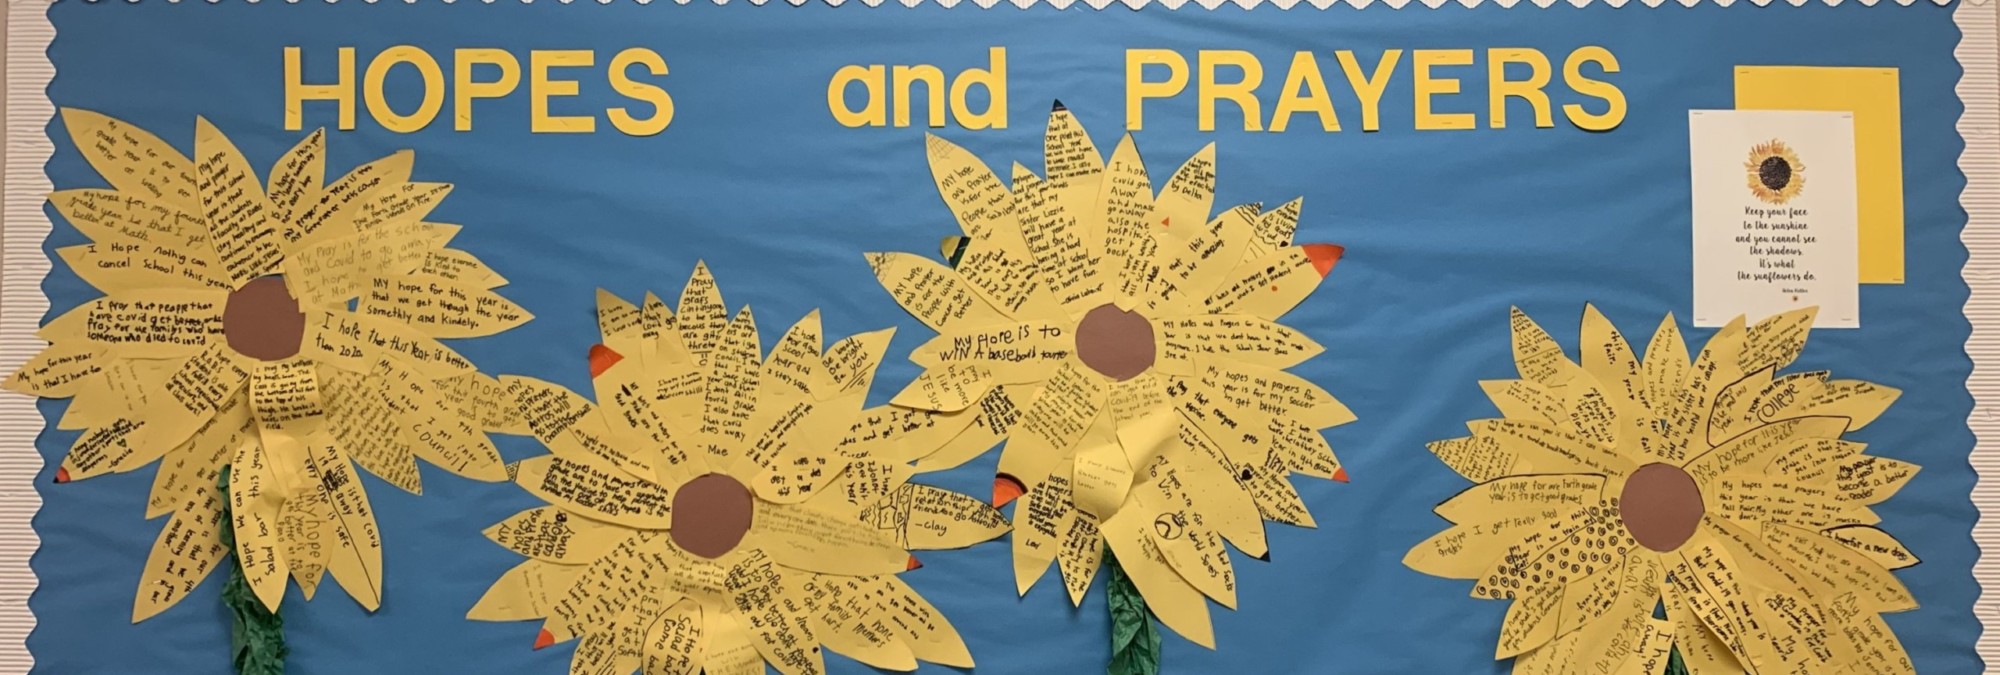 A bulletin board with yellow flowers on it with Hopes and Prayers Quotes